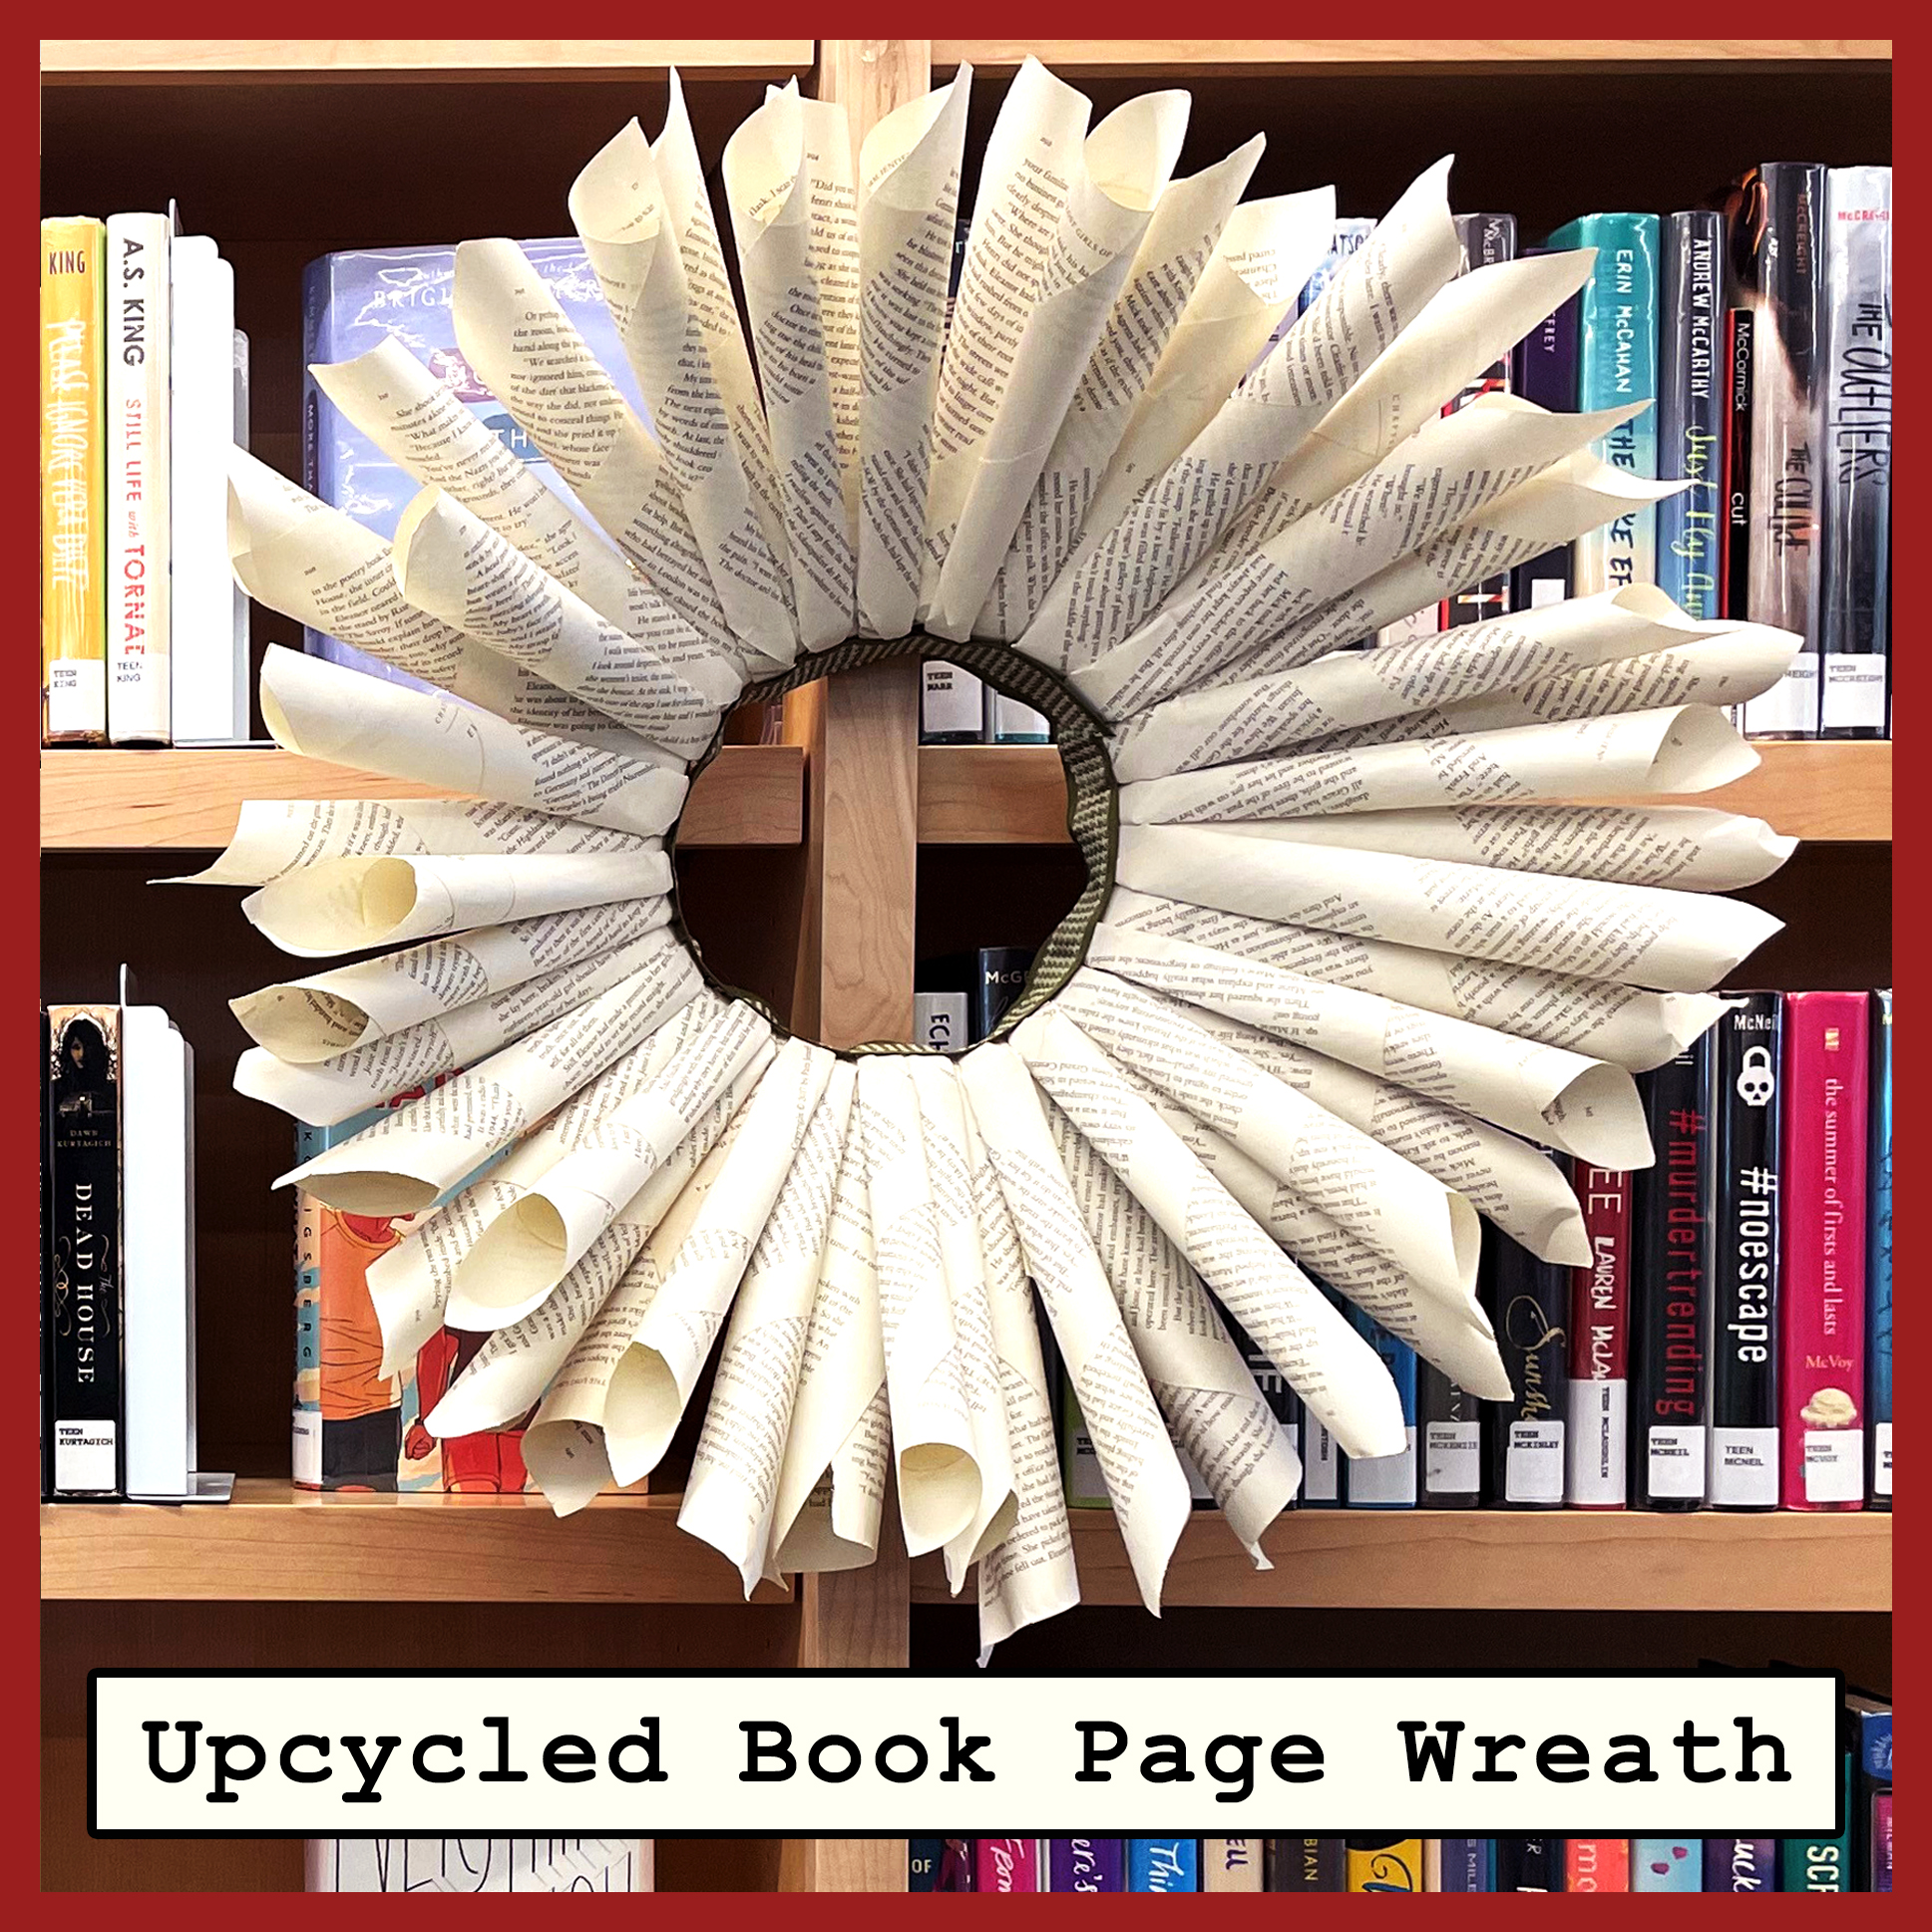 a wreath made of book pages rolled into cone shapes against a background of bookshelves